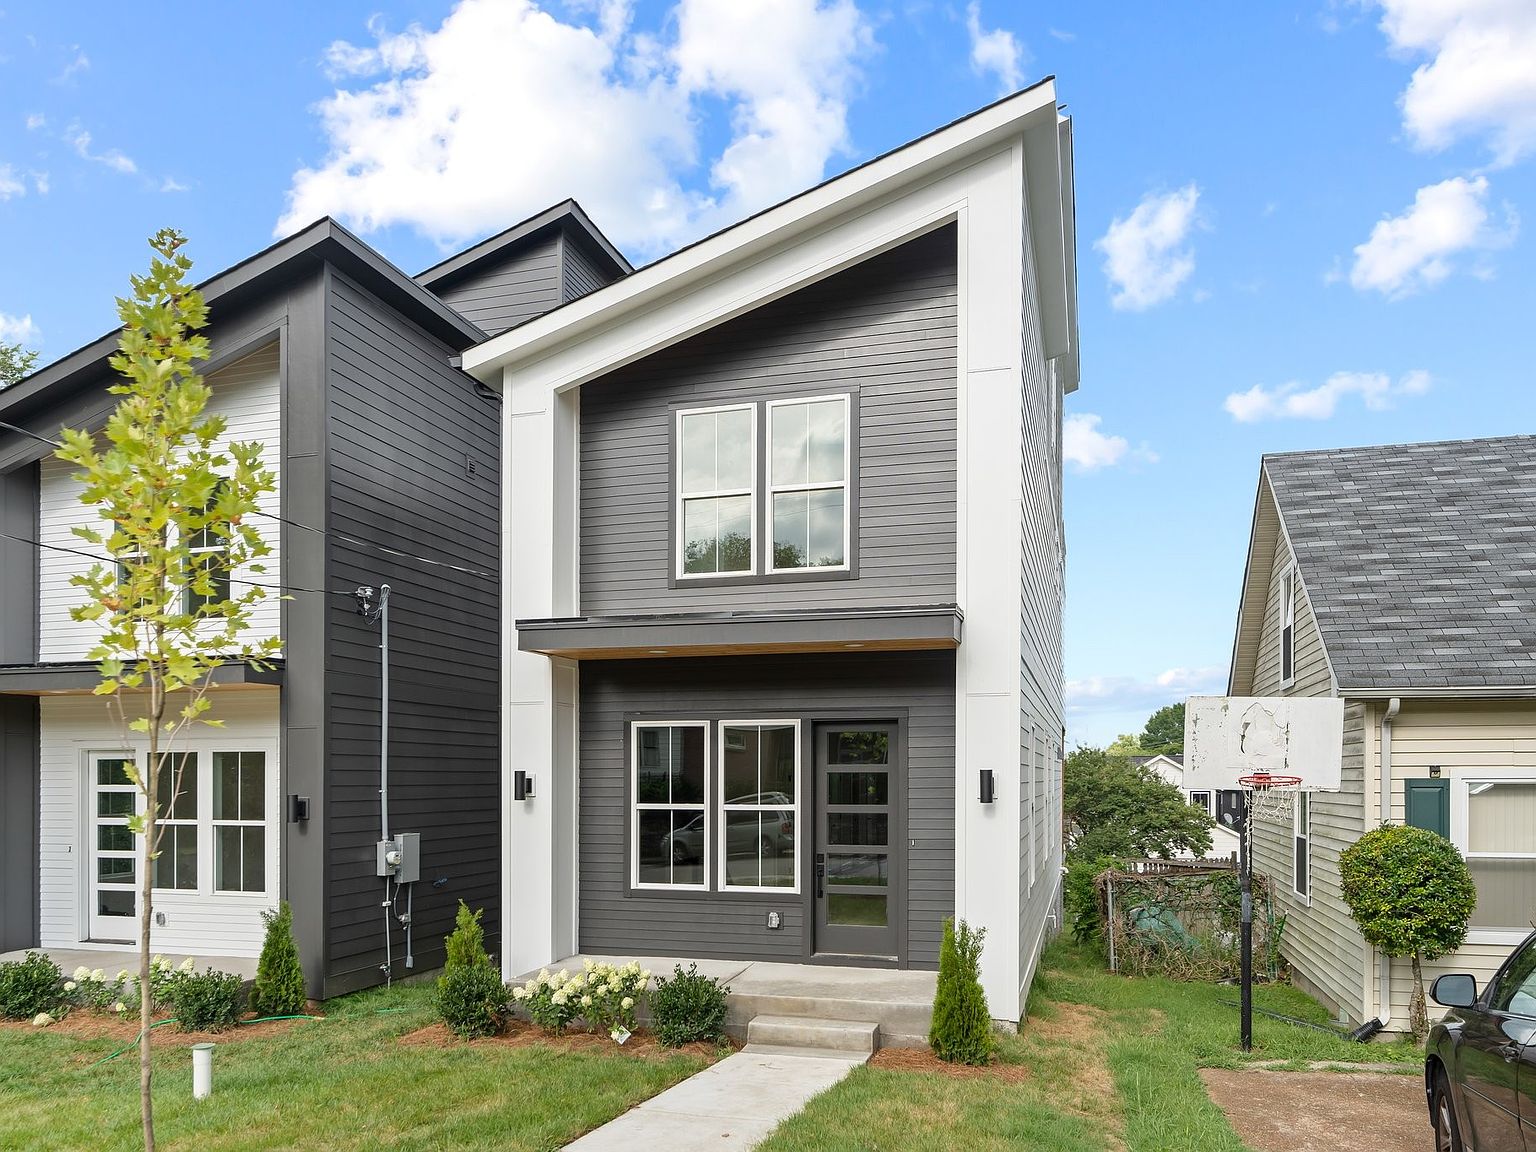 916C 32nd Ave N, Nashville, TN 37209 | MLS #2559221 | Zillow